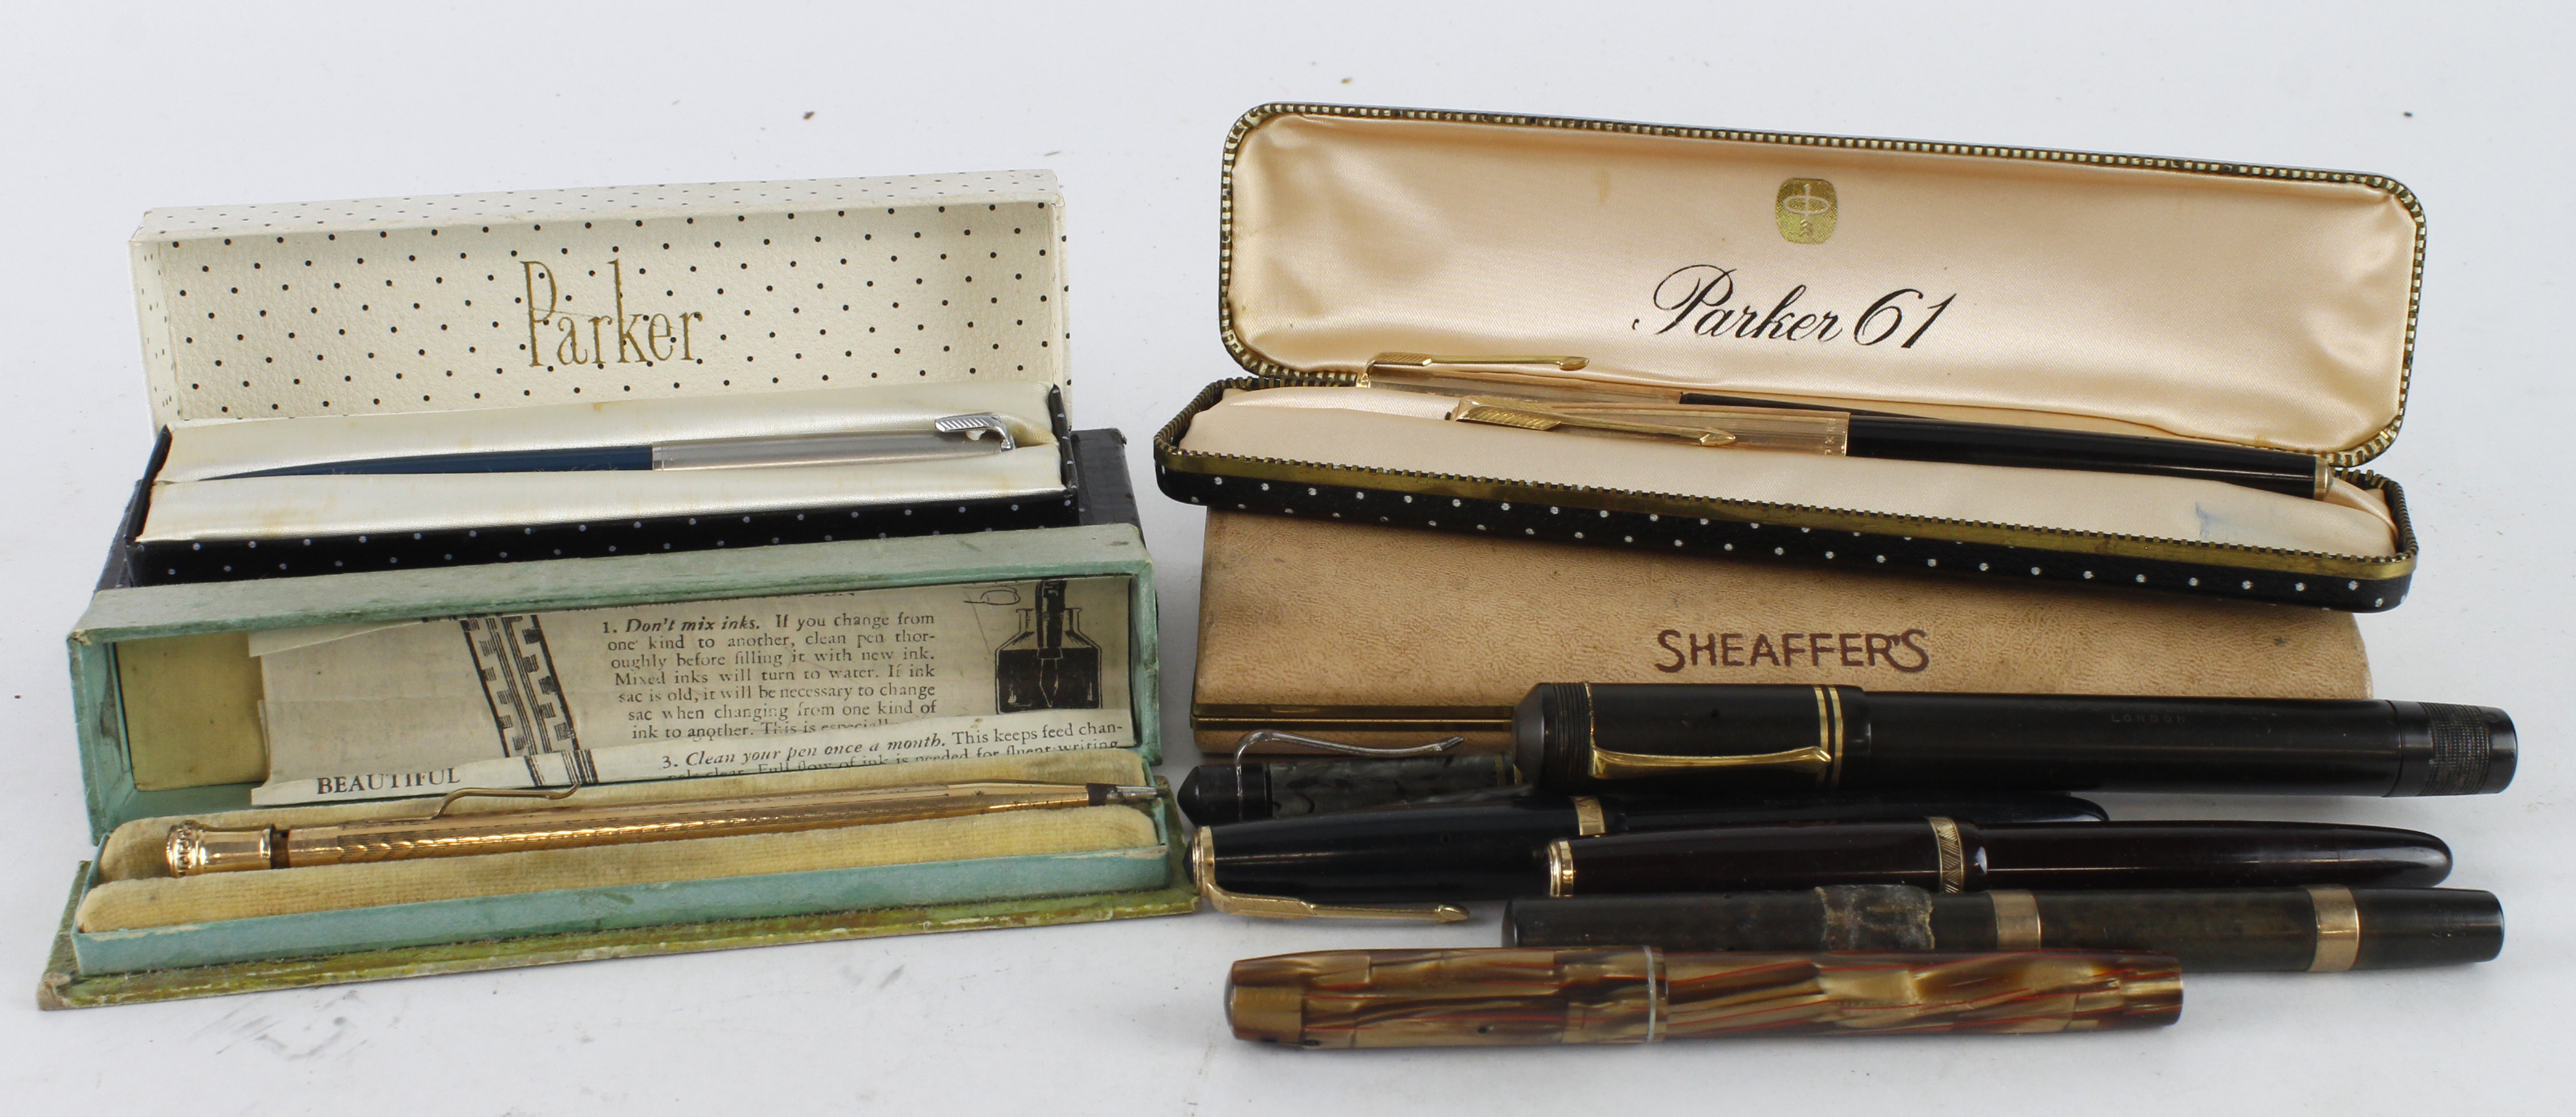 Pens. A collection of fourteen fountain pen, ballpoint pens and pencils, makers include Parker,